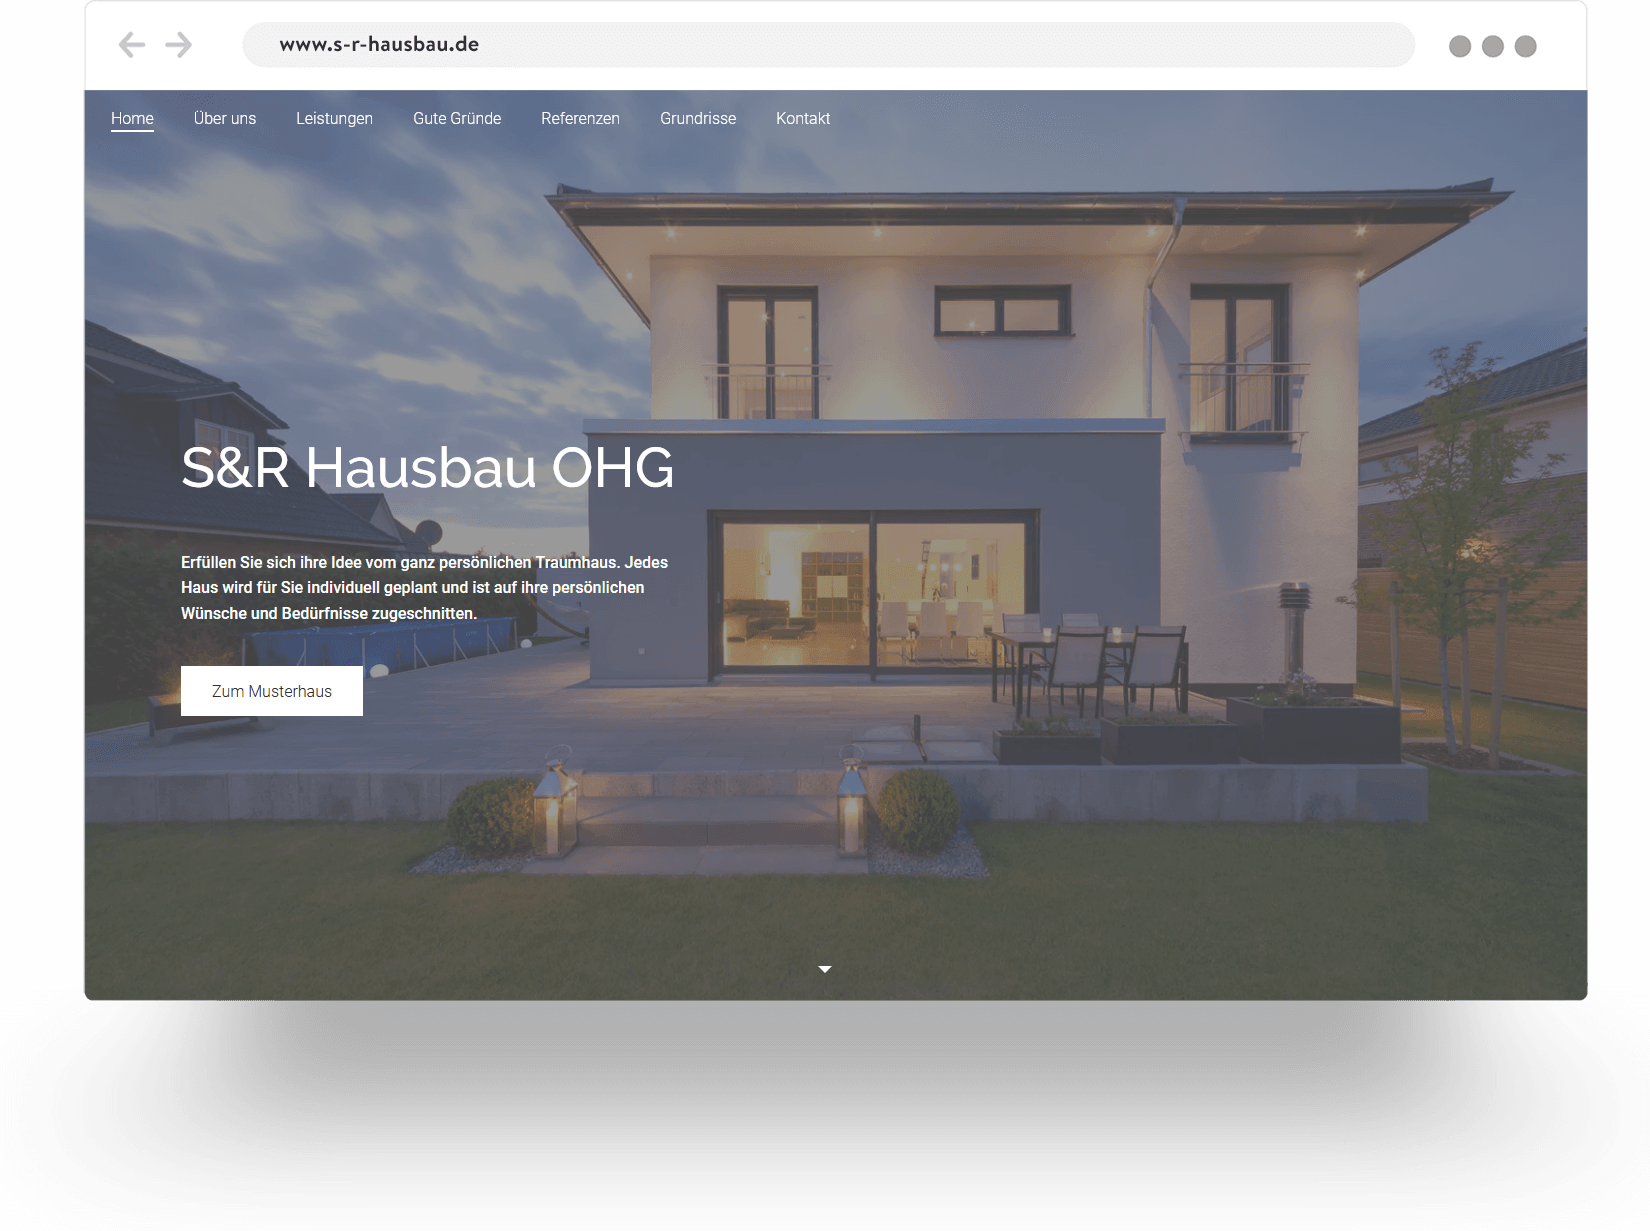 Example of a real estate company website built with Jimdo